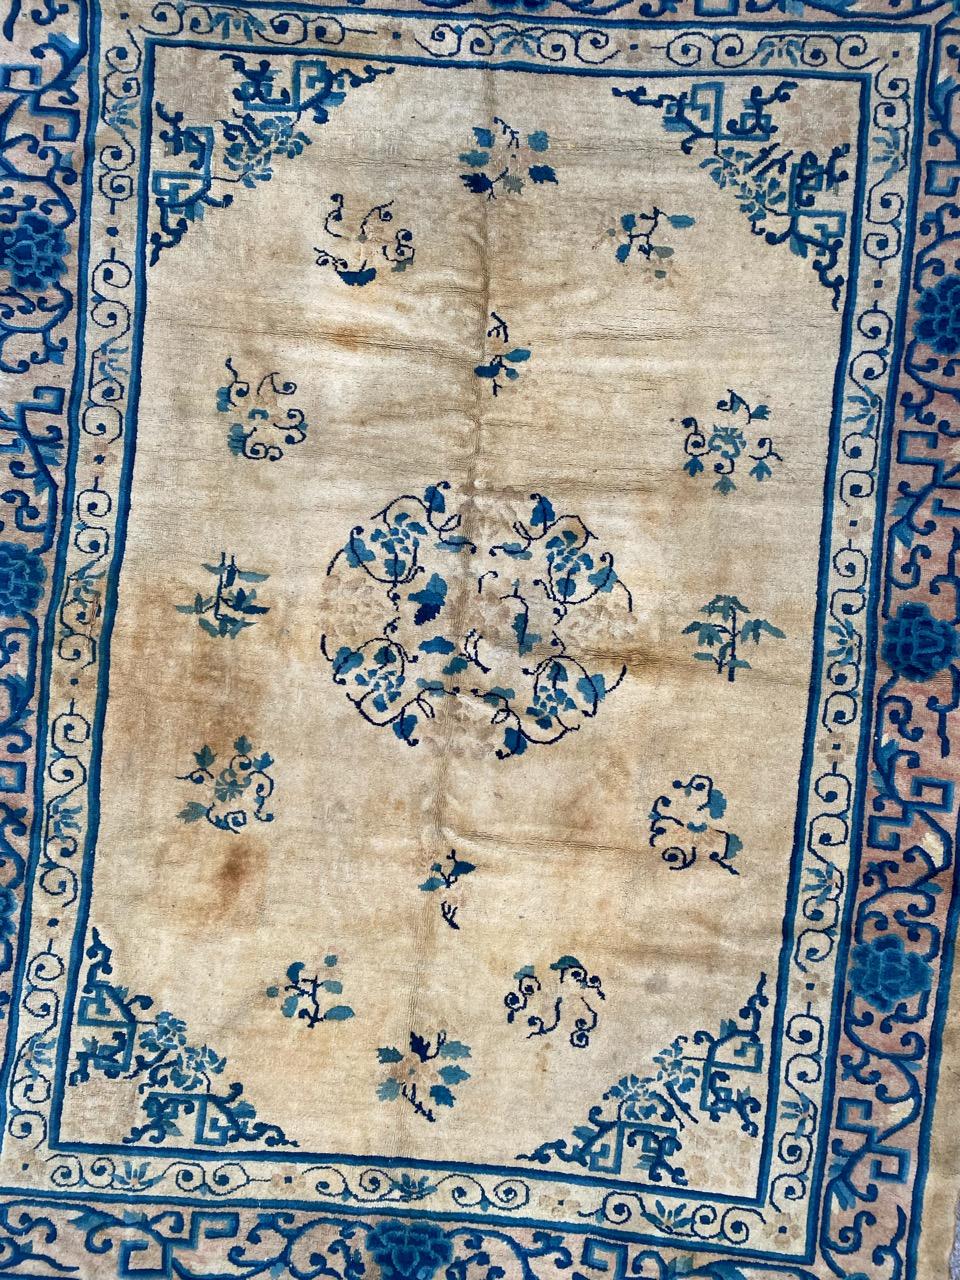 Nice late 19th century Chinese rug with beautiful Chinese design and beautiful natural colors, entirely hand knotted with wool velvet on cotton foundation.

✨✨✨
